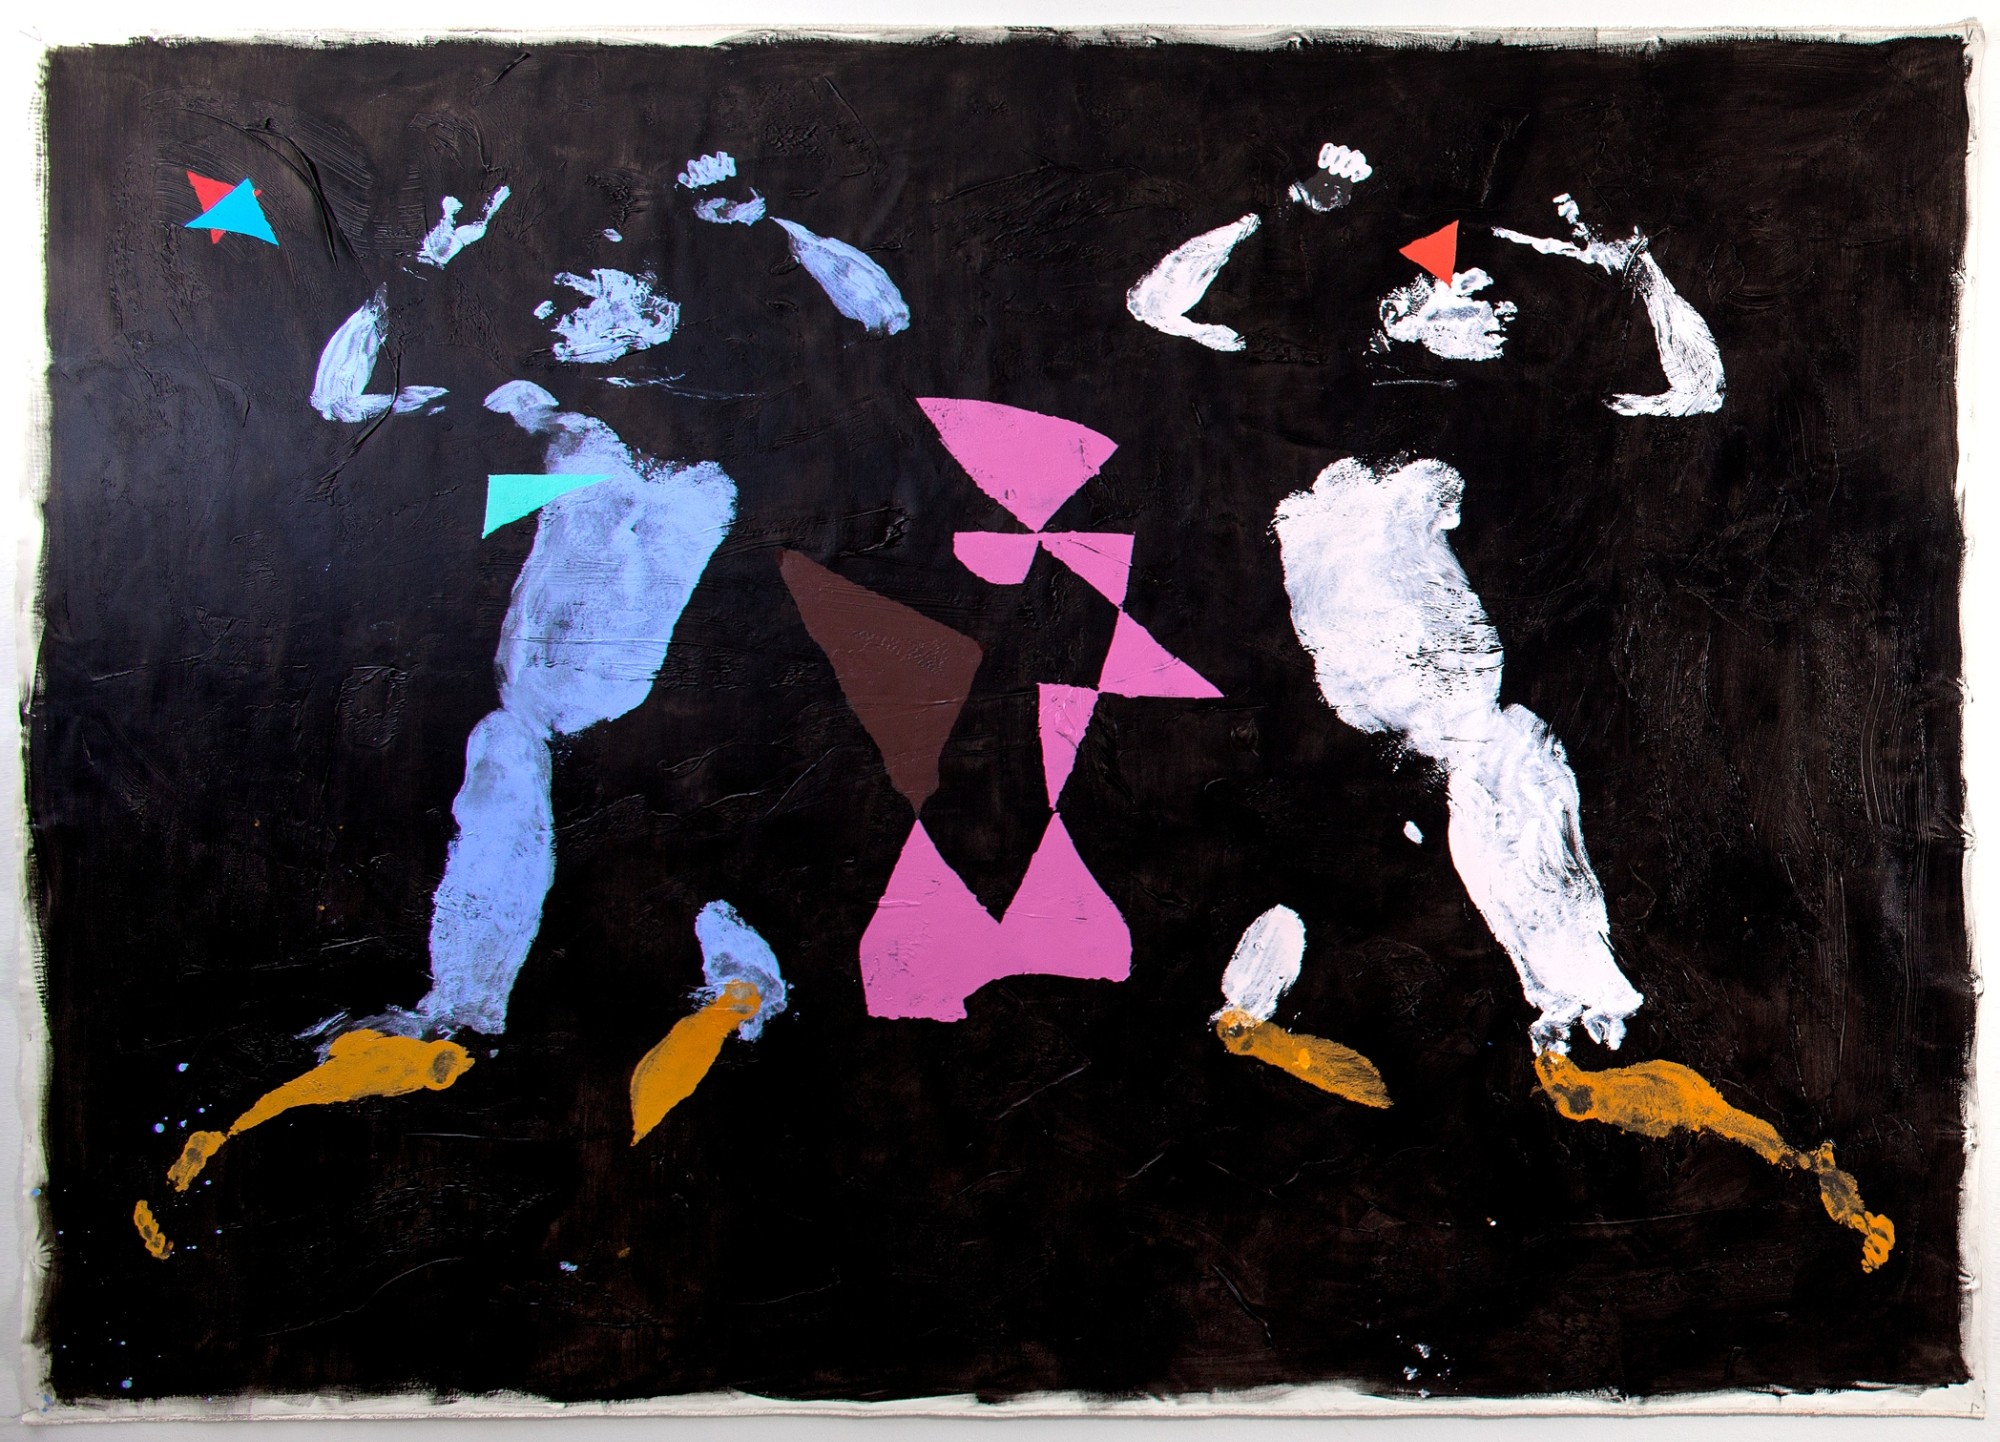 René Luckhardt, 2 figures dancing with abstract shape (black), 2013, human monotype painting, synthetic polymer acrylics on canvas, 215 x 300 cm